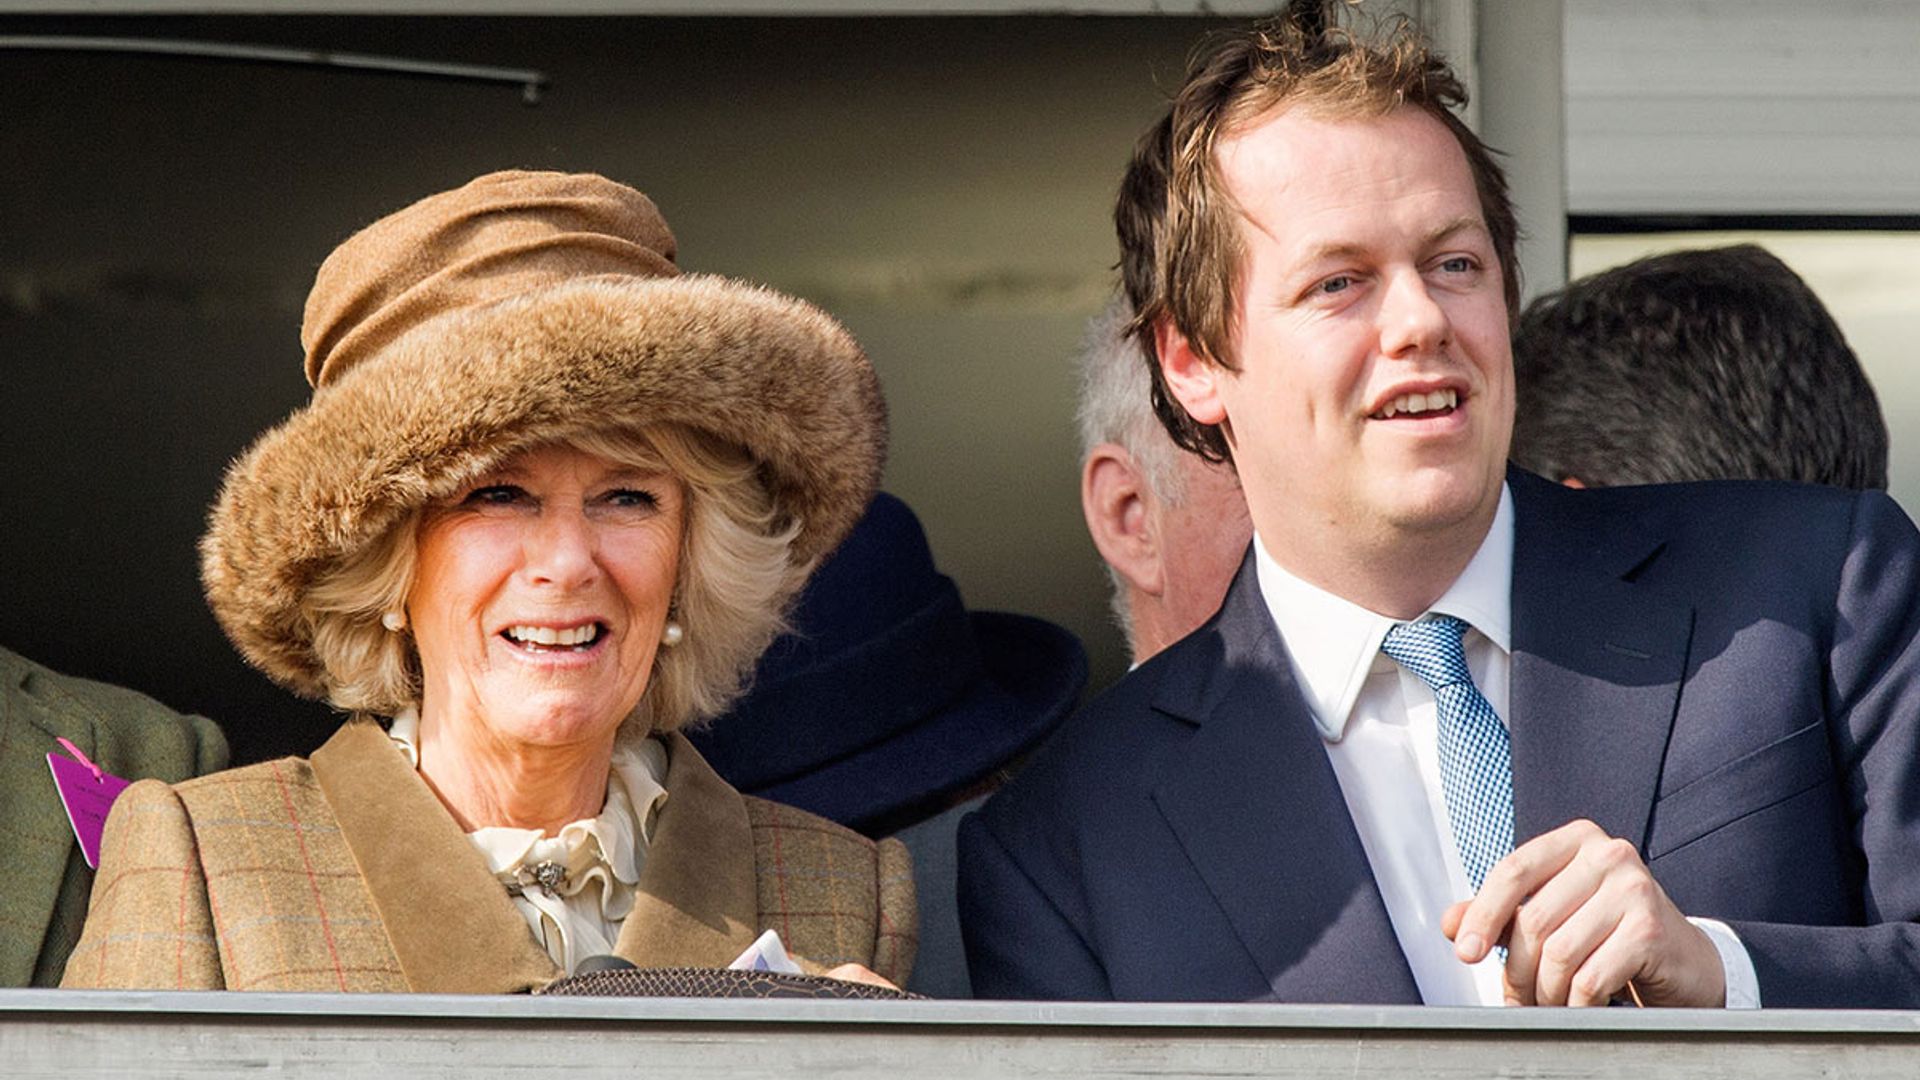 Royal brunch! The Duchess of Cornwall's baked eggs recipe by son Tom Parker-Bowles